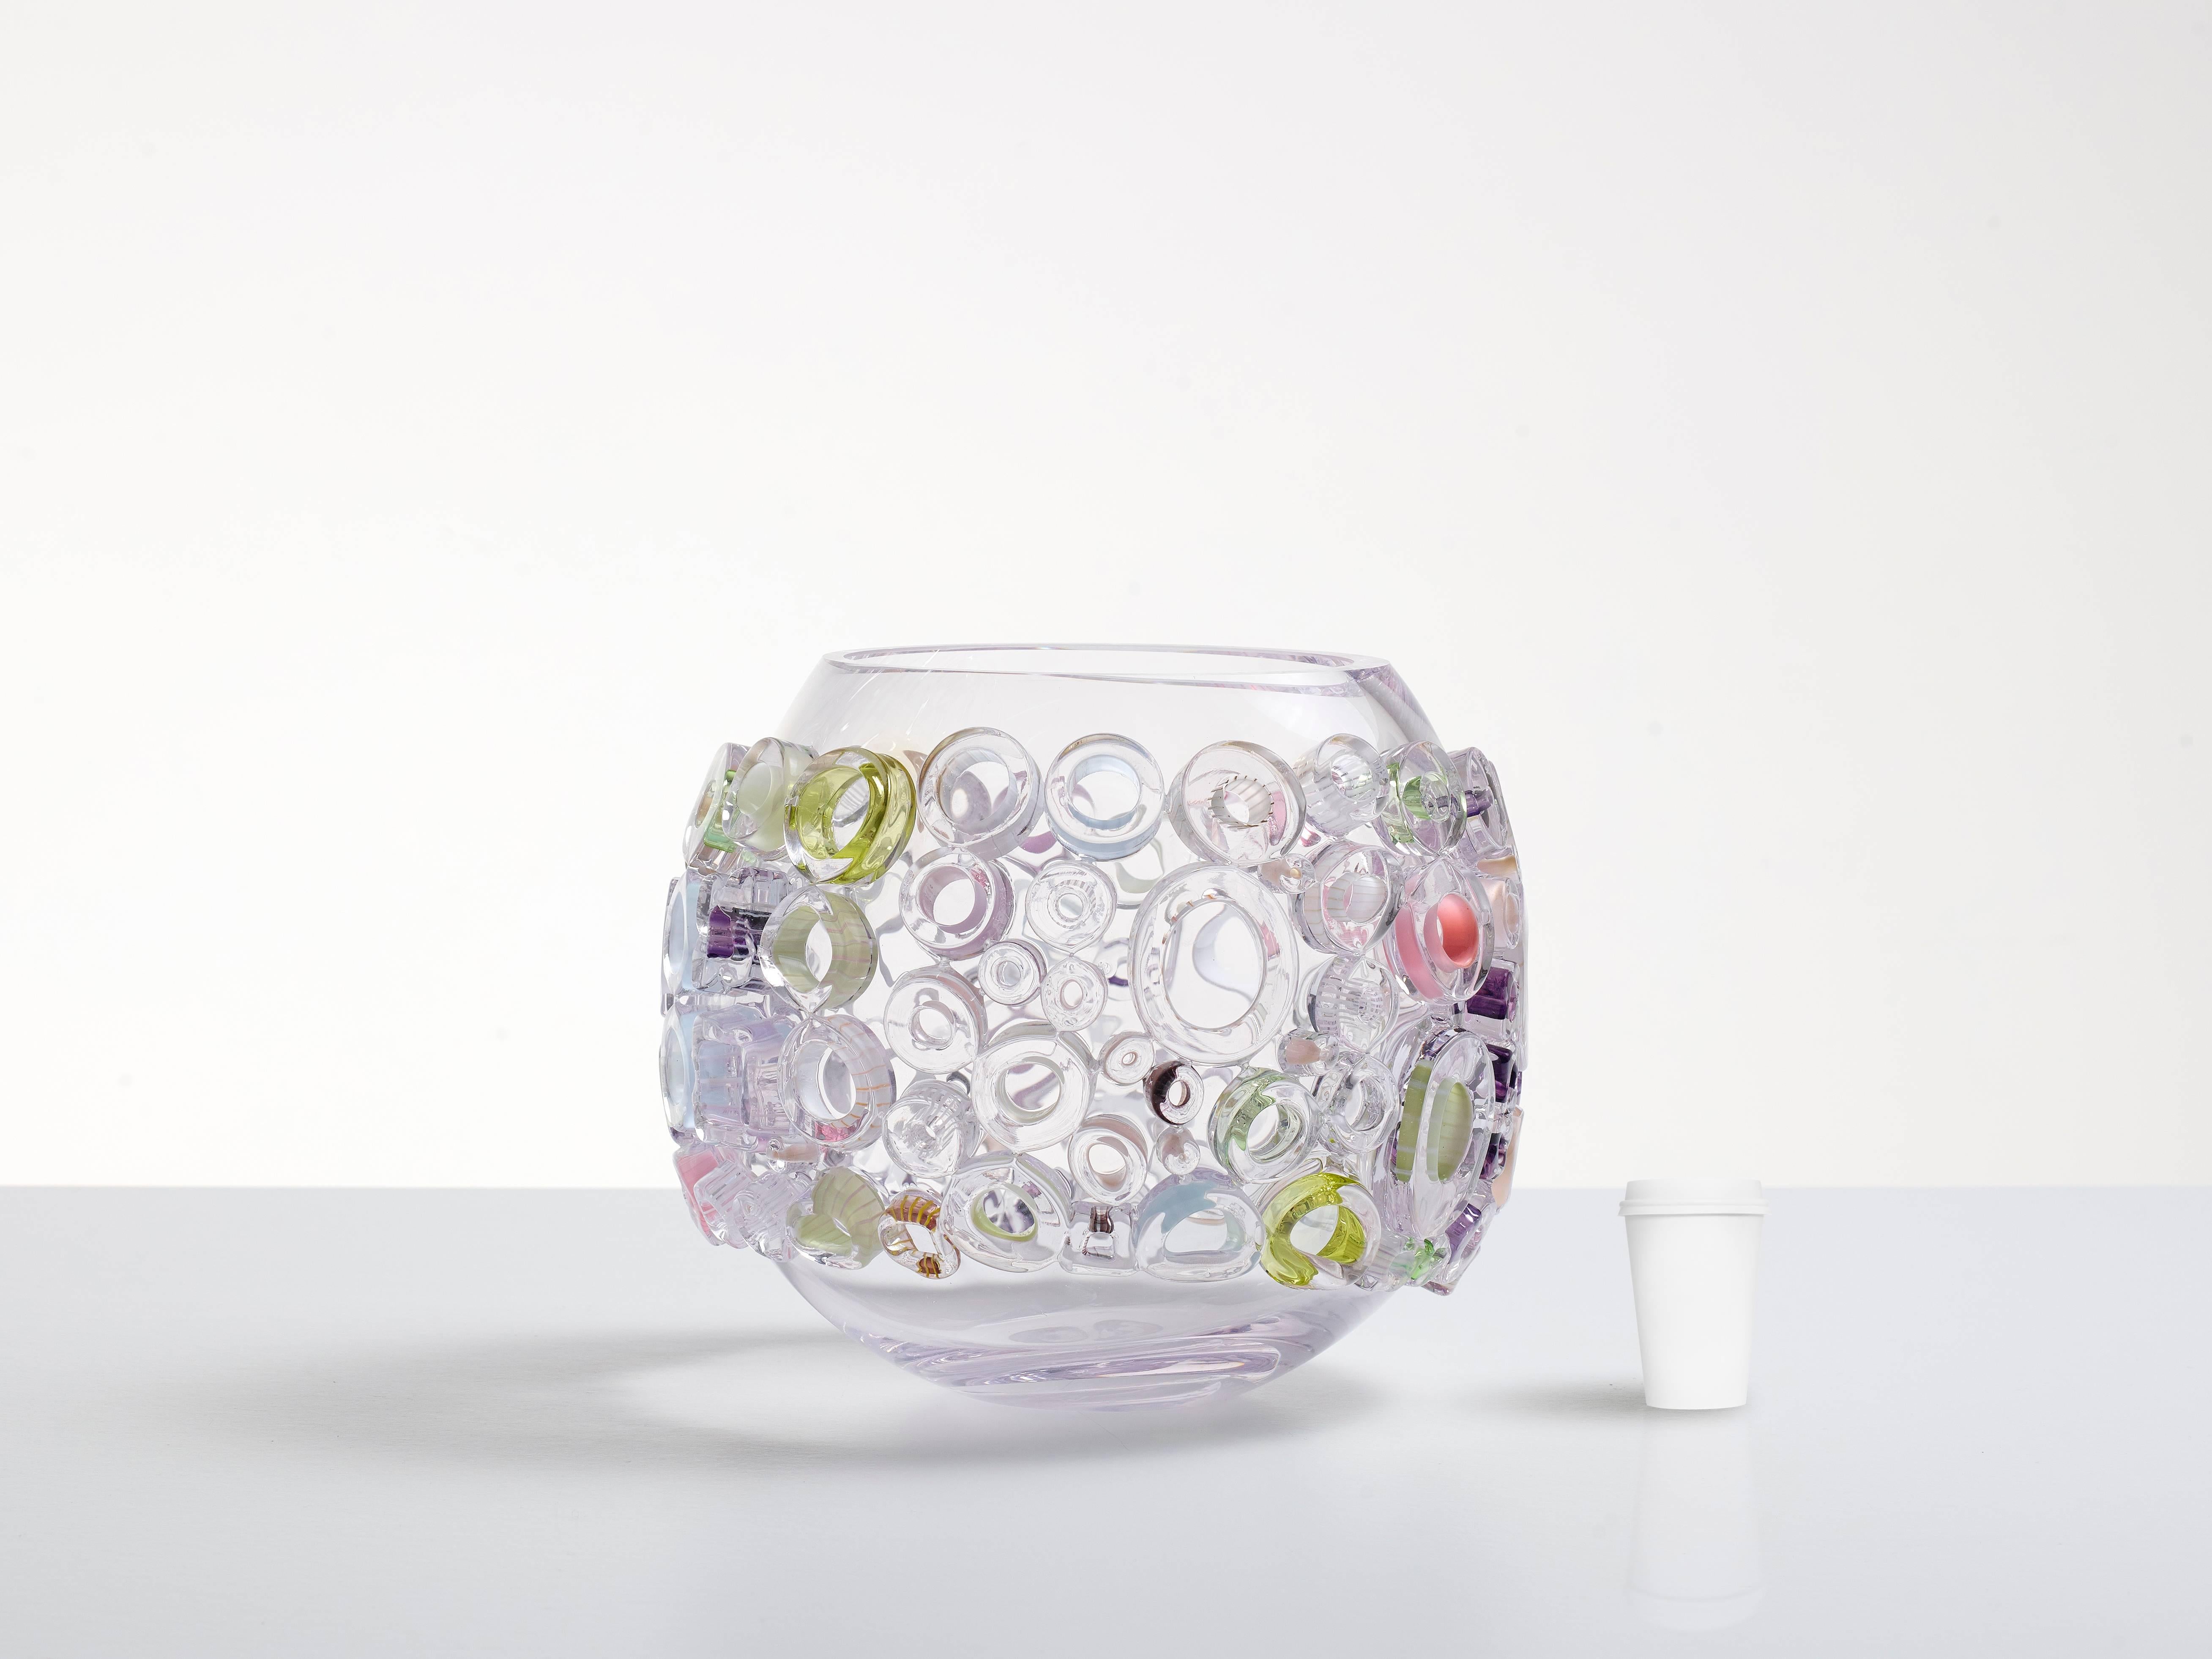 Blown glass bowl shaped sculpture. Translucent blown glass with glass ornaments melted to the body. The ornaments on the outside of the glass bowl contain subtle color applications in pastels like: pink, green, yellow, blue and purple. Each